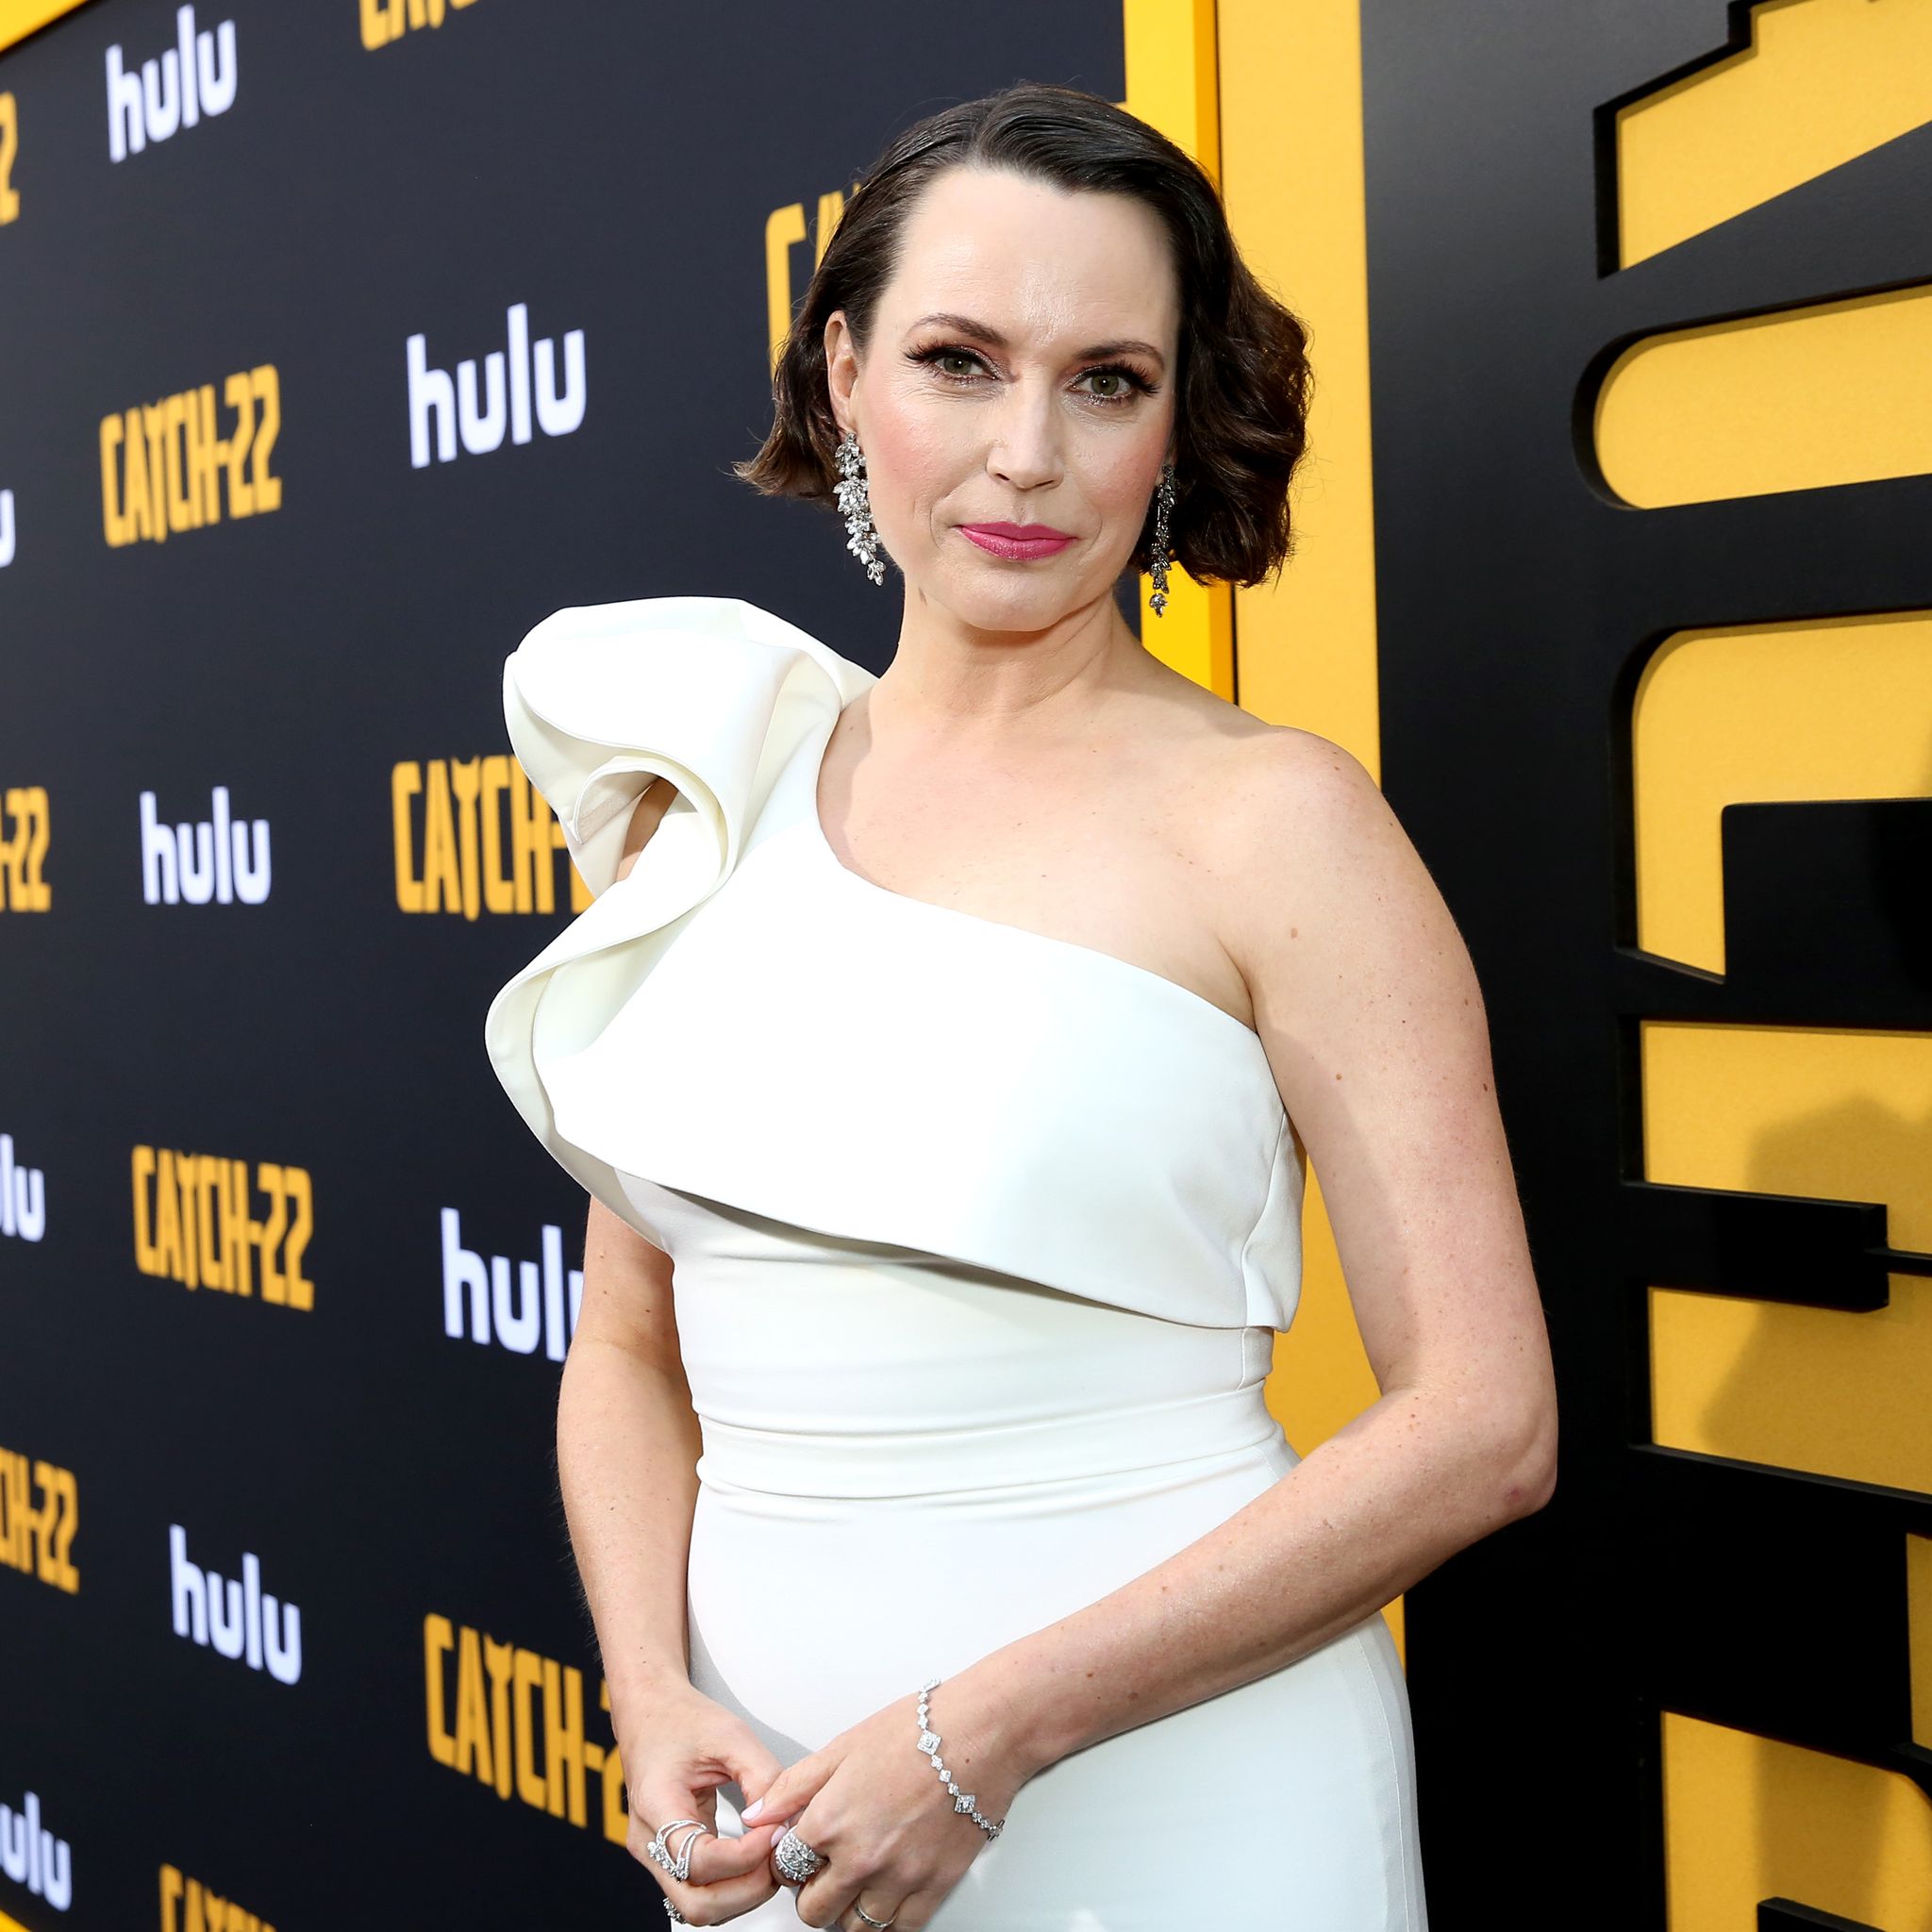 Catch 22 S Julie Ann Emery How My Sex Scenes And Nudity Were Handled Better Than On Any Other